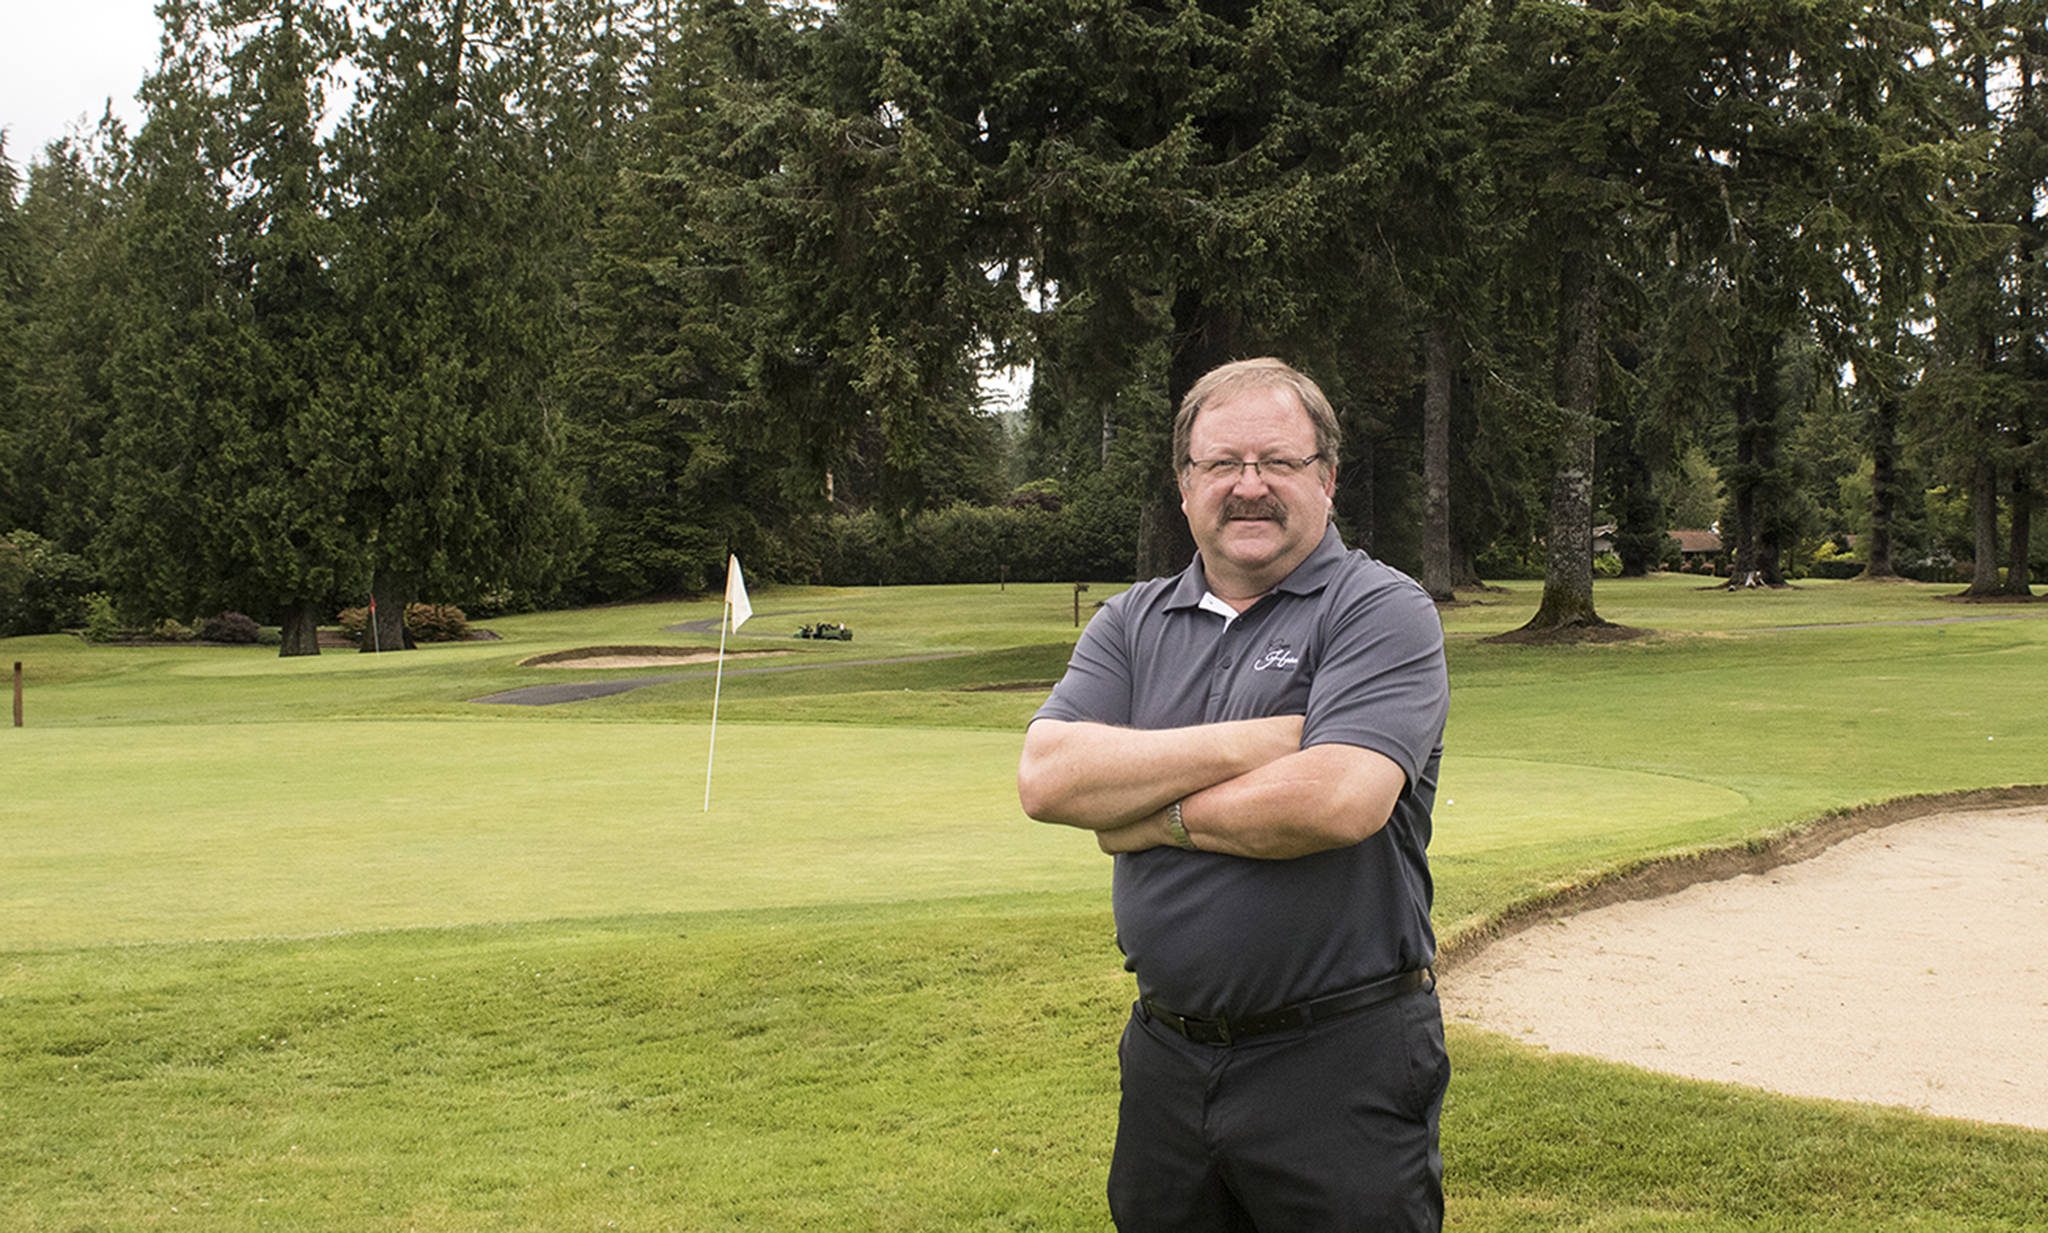 (Brendan Carl | The Daily World) Brian Davis is in his first year as the golf professional at Grays Harbor Country Club. The native of Oregon has been a golf pro at several courses around the northwest and brings his experience to the country club with the goal of getting it back to its glory years.